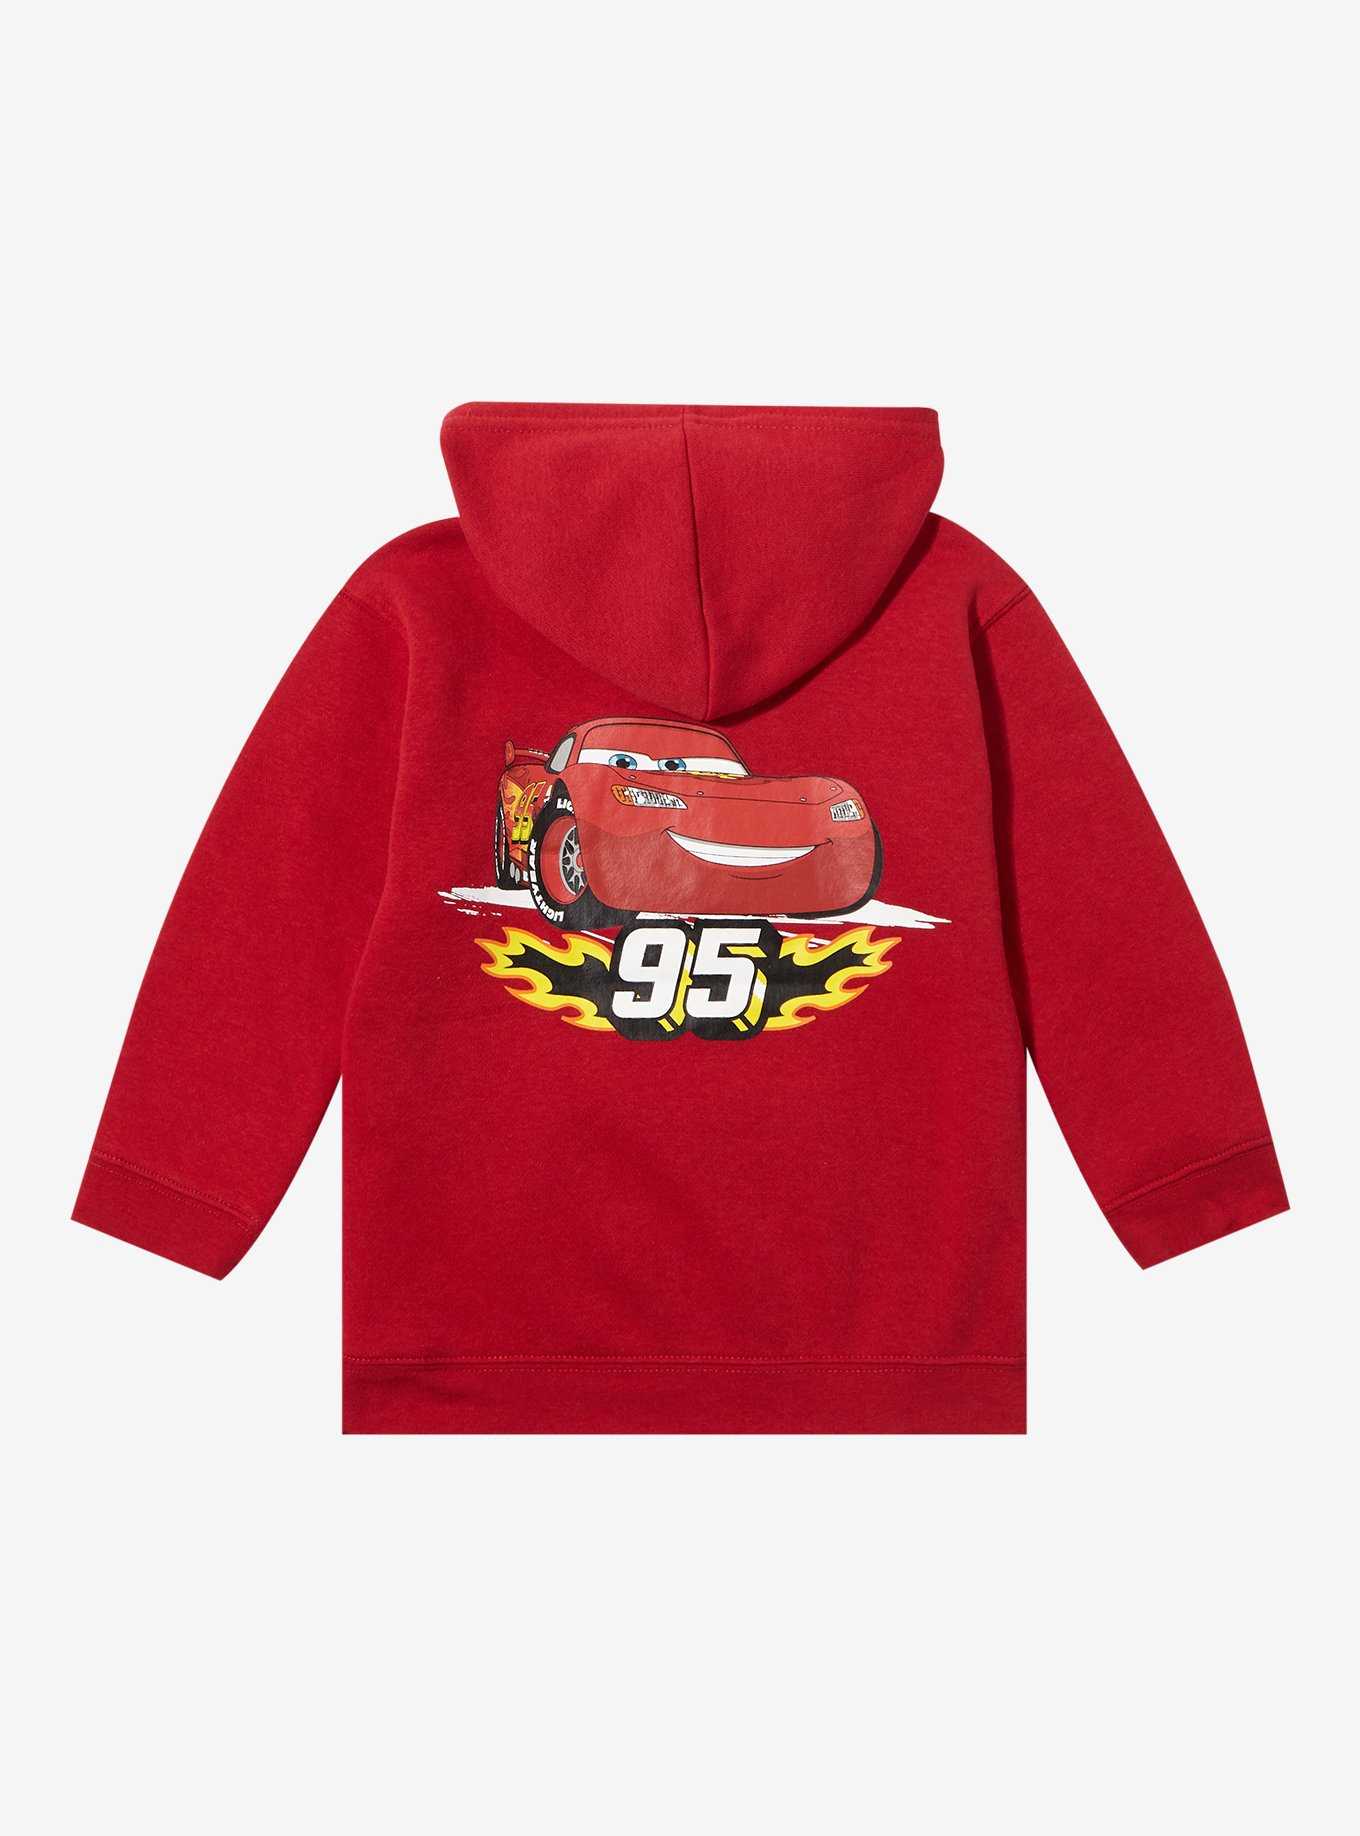 OFFICIAL Disney Cars T-Shirts and Merchandise